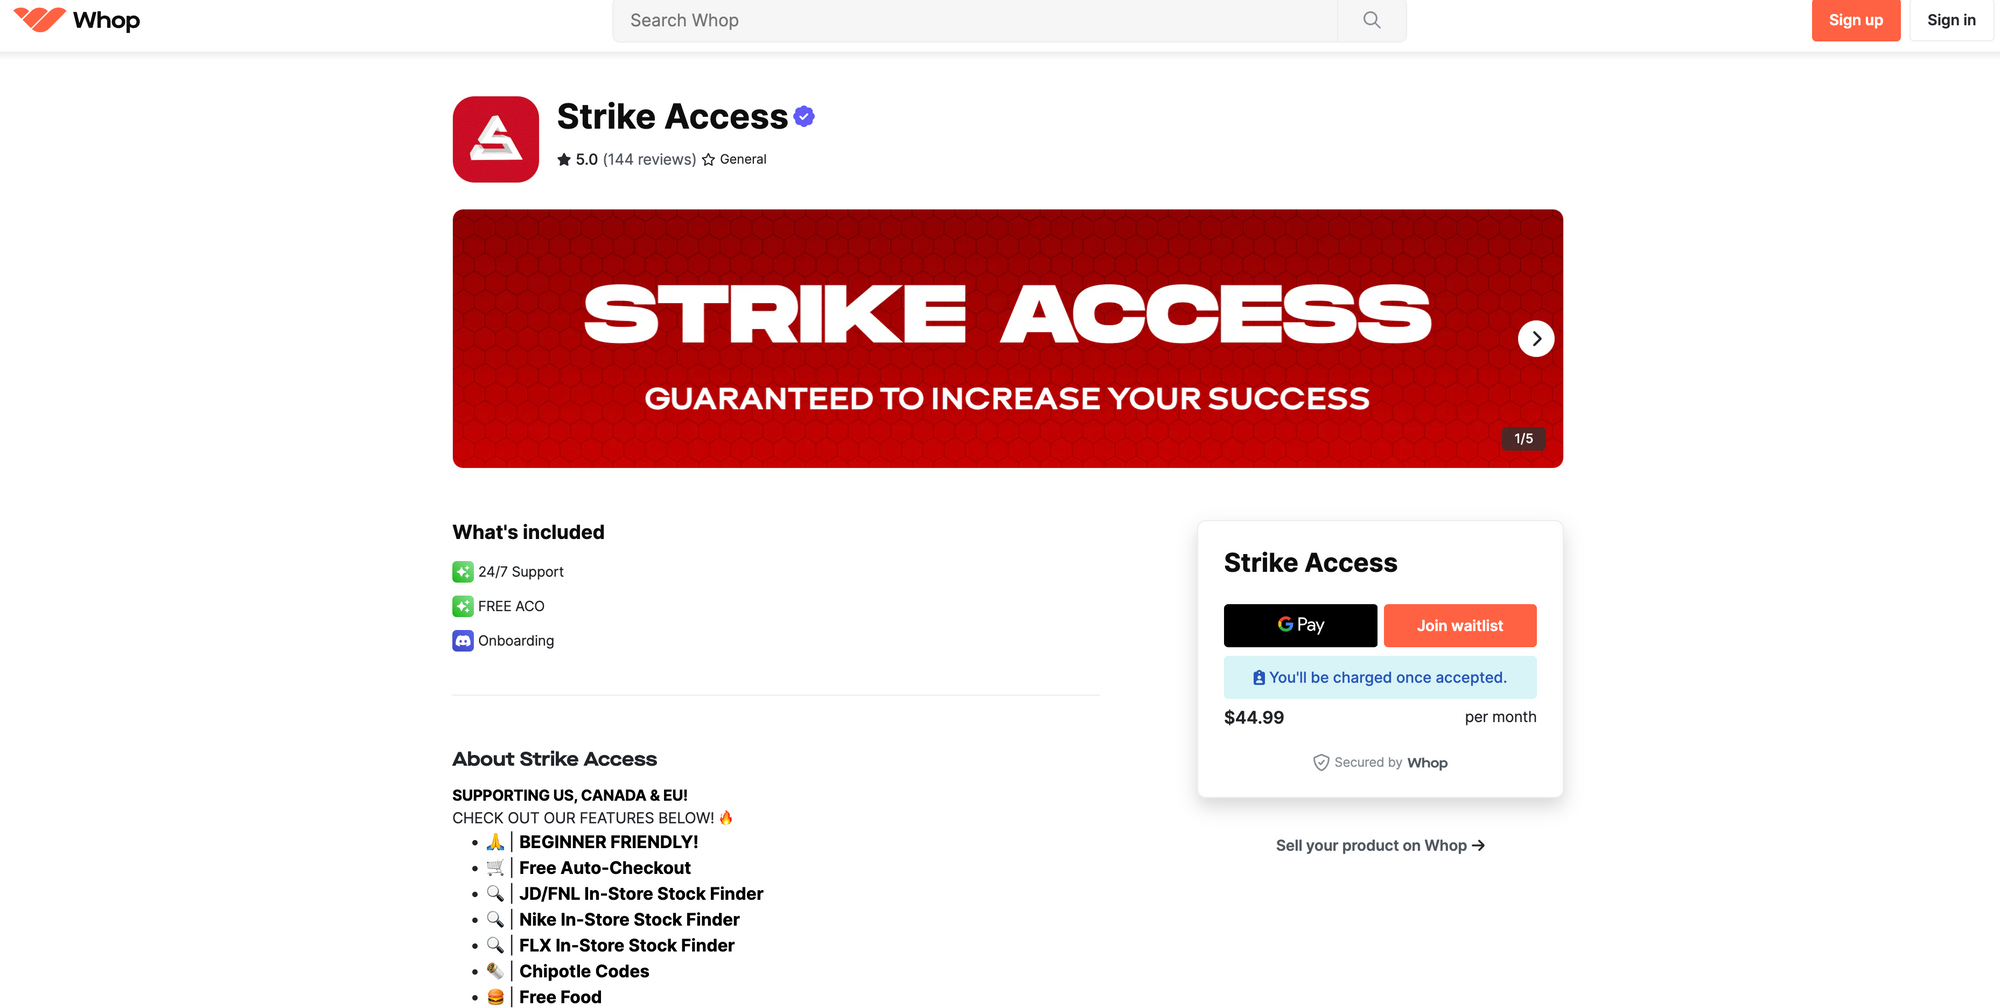 Image of Strike Access on Whop